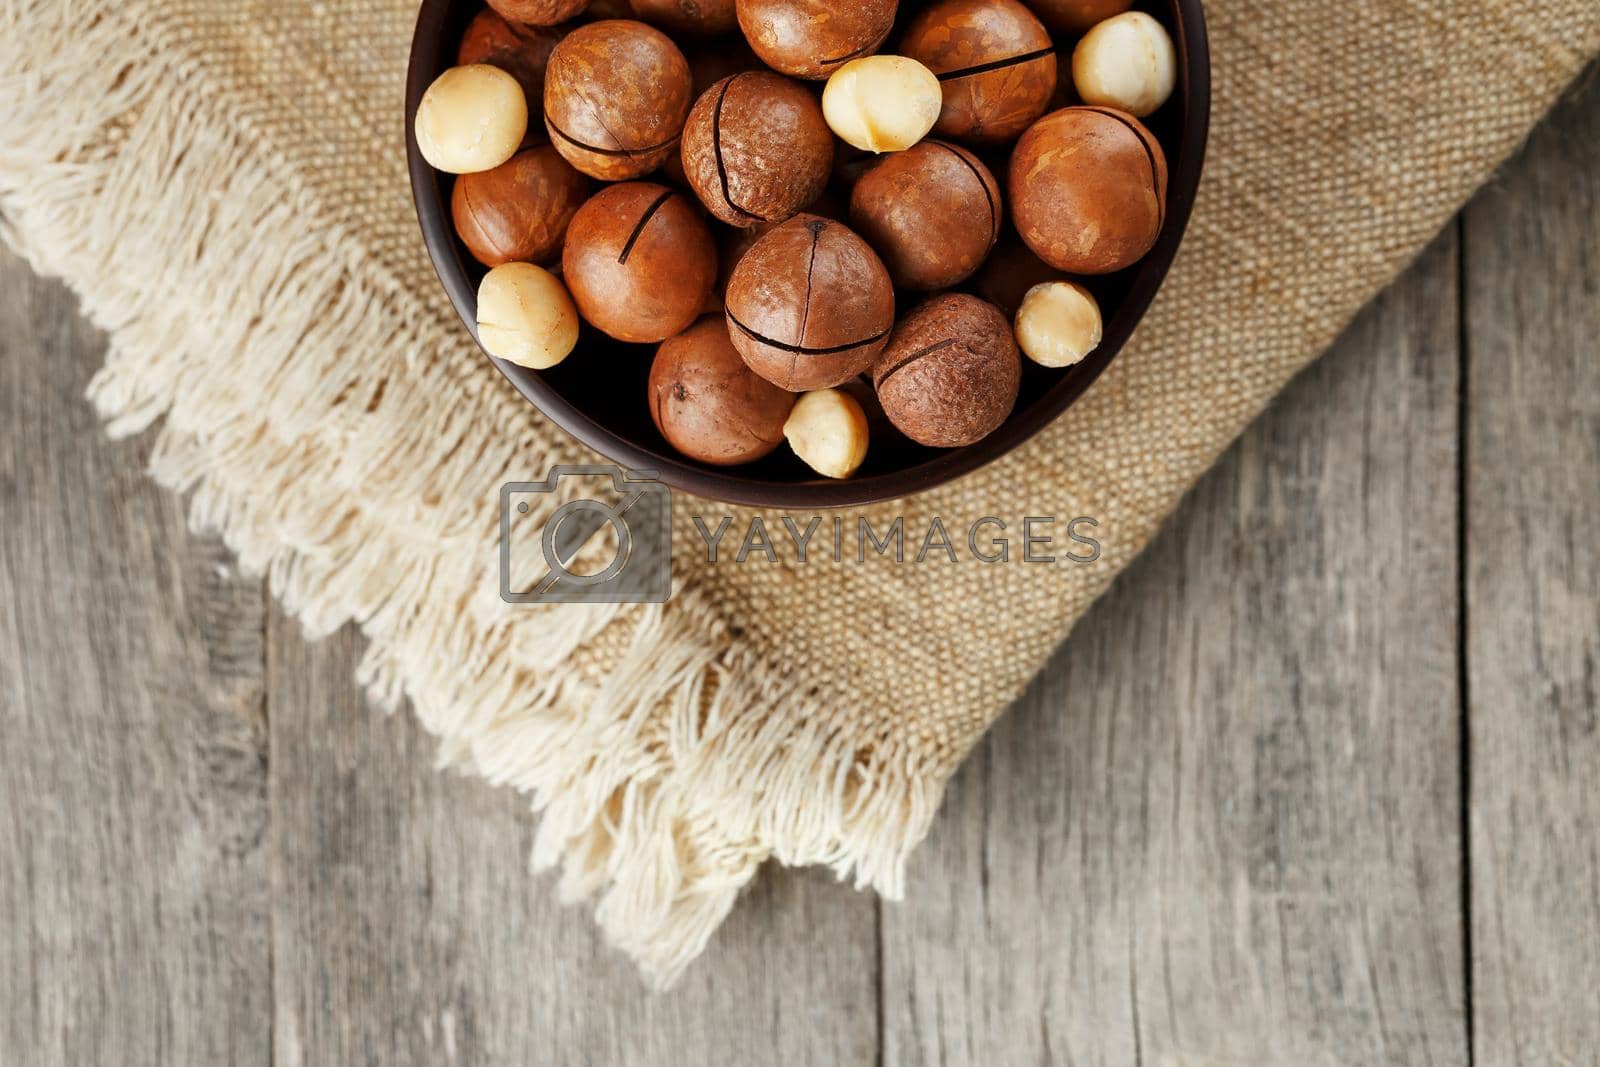 Royalty free image of Macadamia nut on wooden background with vintage cloth, concept of superfoods and healthy food by AlexGrec